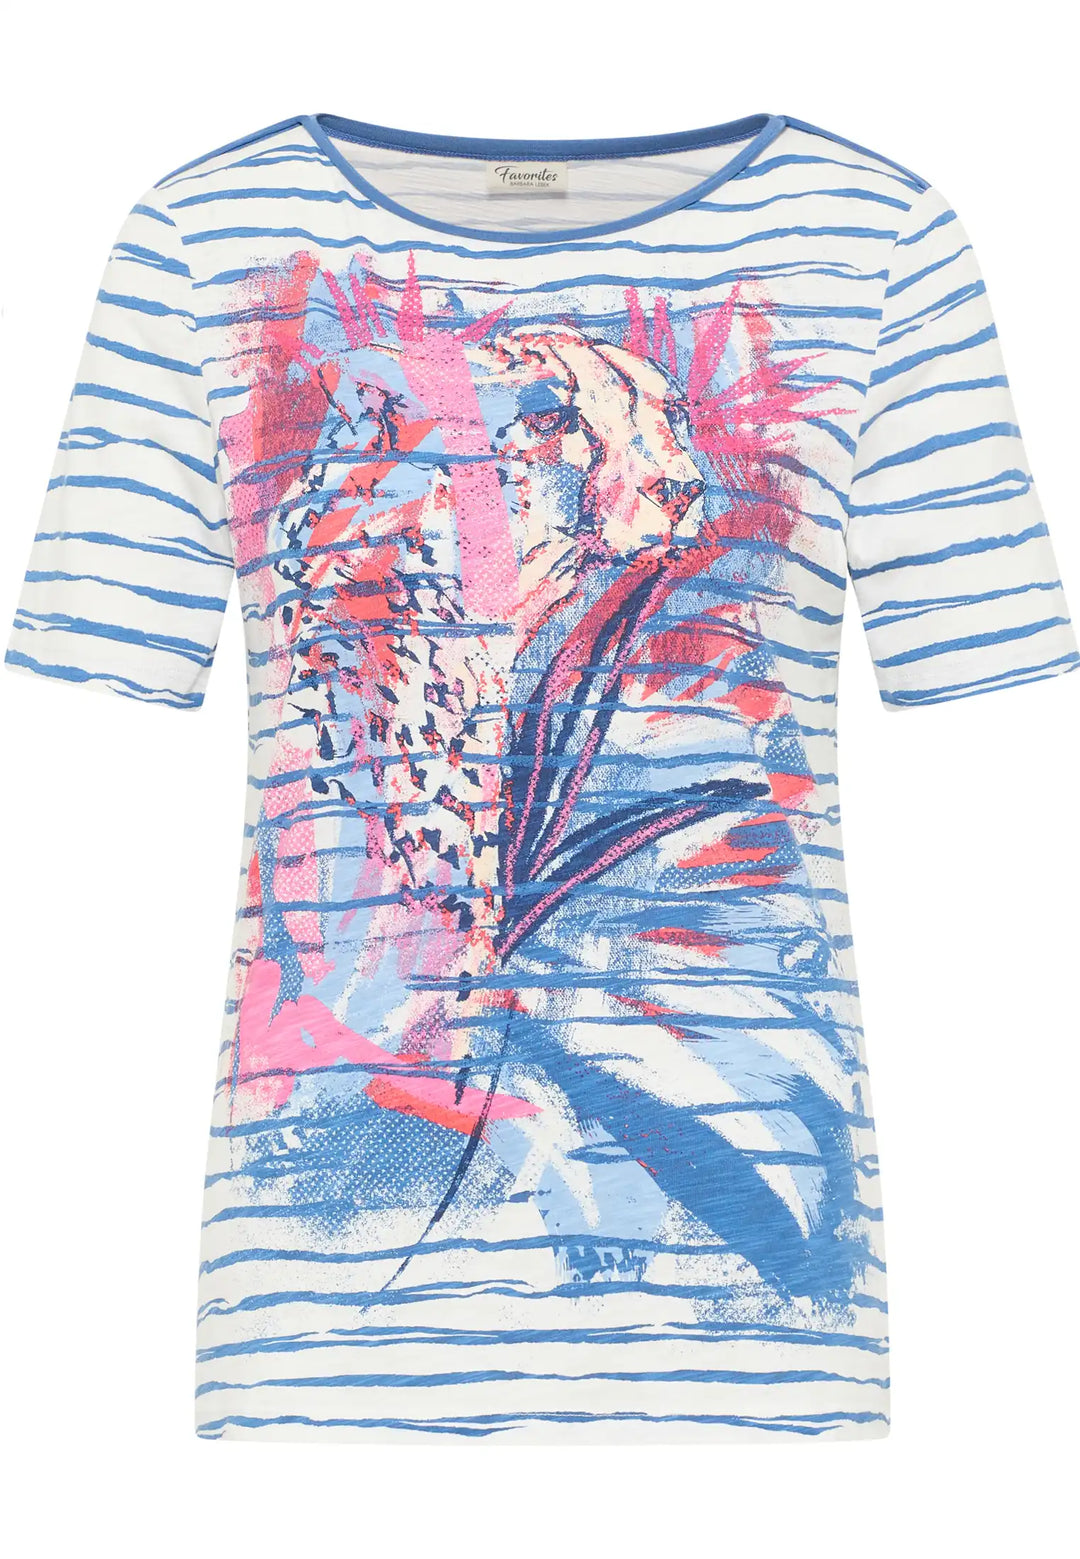 Abstract ocean-inspired print top with blue, pink, and coral hues on a striped background with three-quarter sleeves, merging art with apparel, style 57170042-850